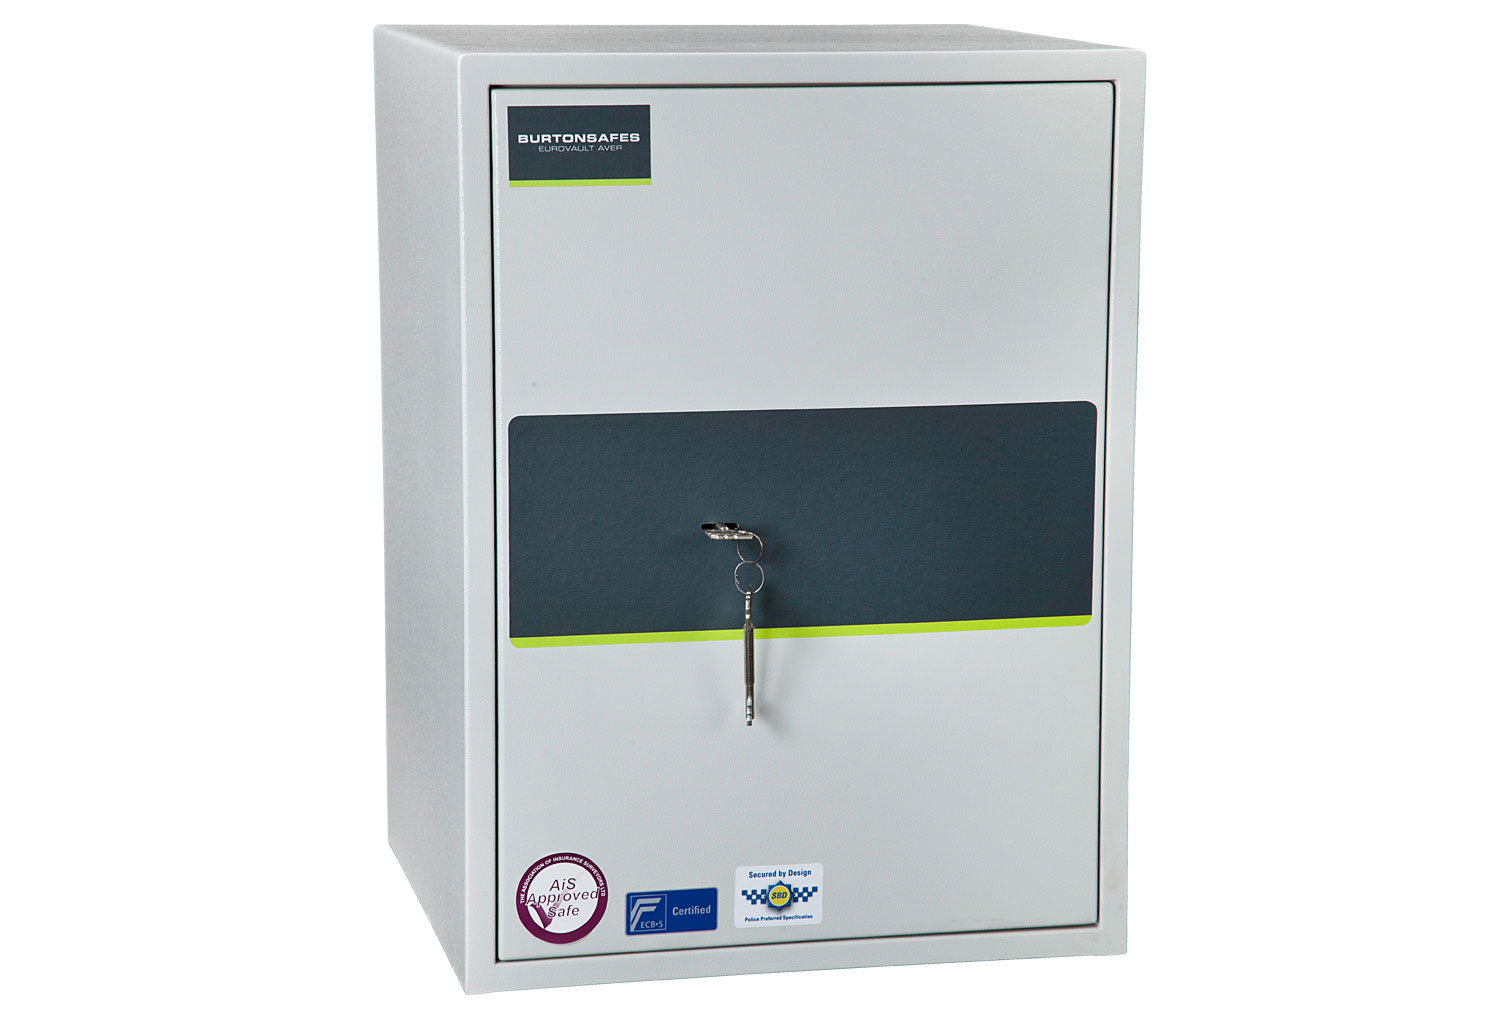 Burton Eurovault Aver S2 Size 4 Safe With Key Lock (56ltrs), Fully Installed